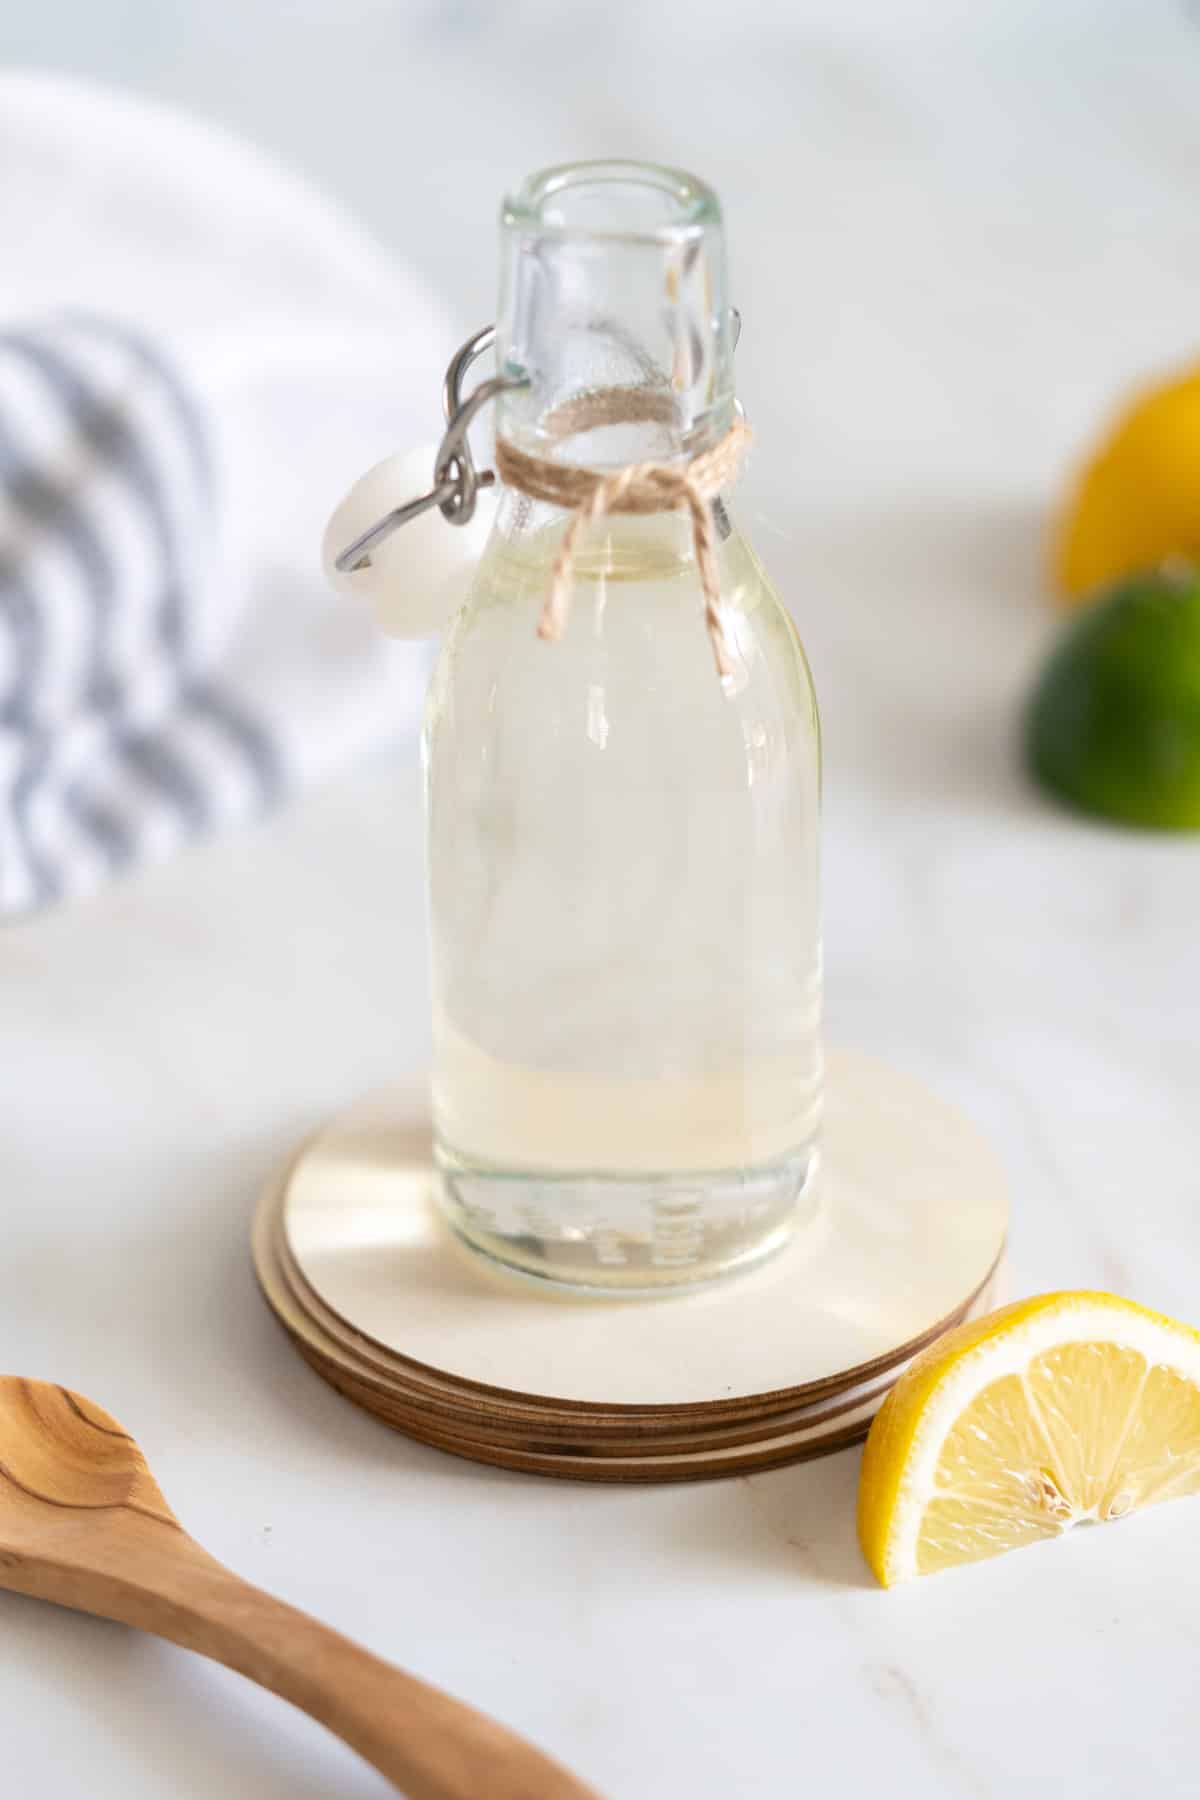 Simple syrup in a bottle with a slice of lemon and wooden spoon.